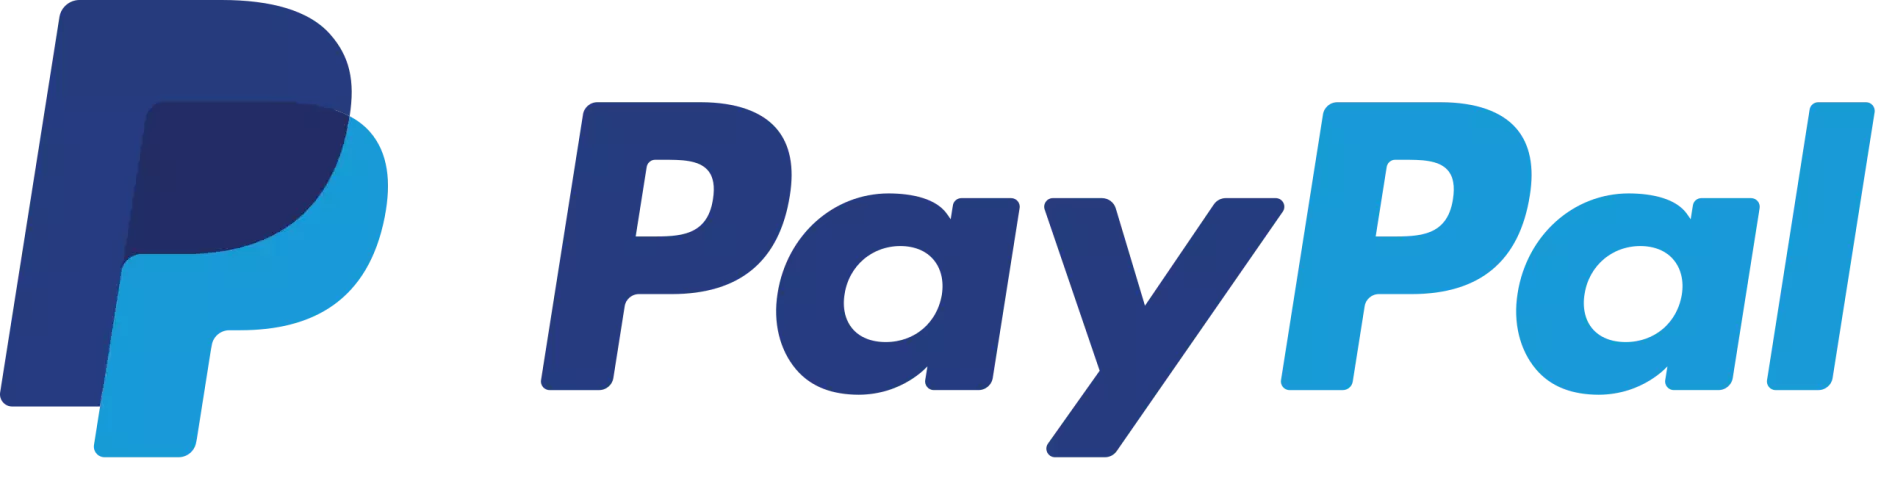 PayPal svg